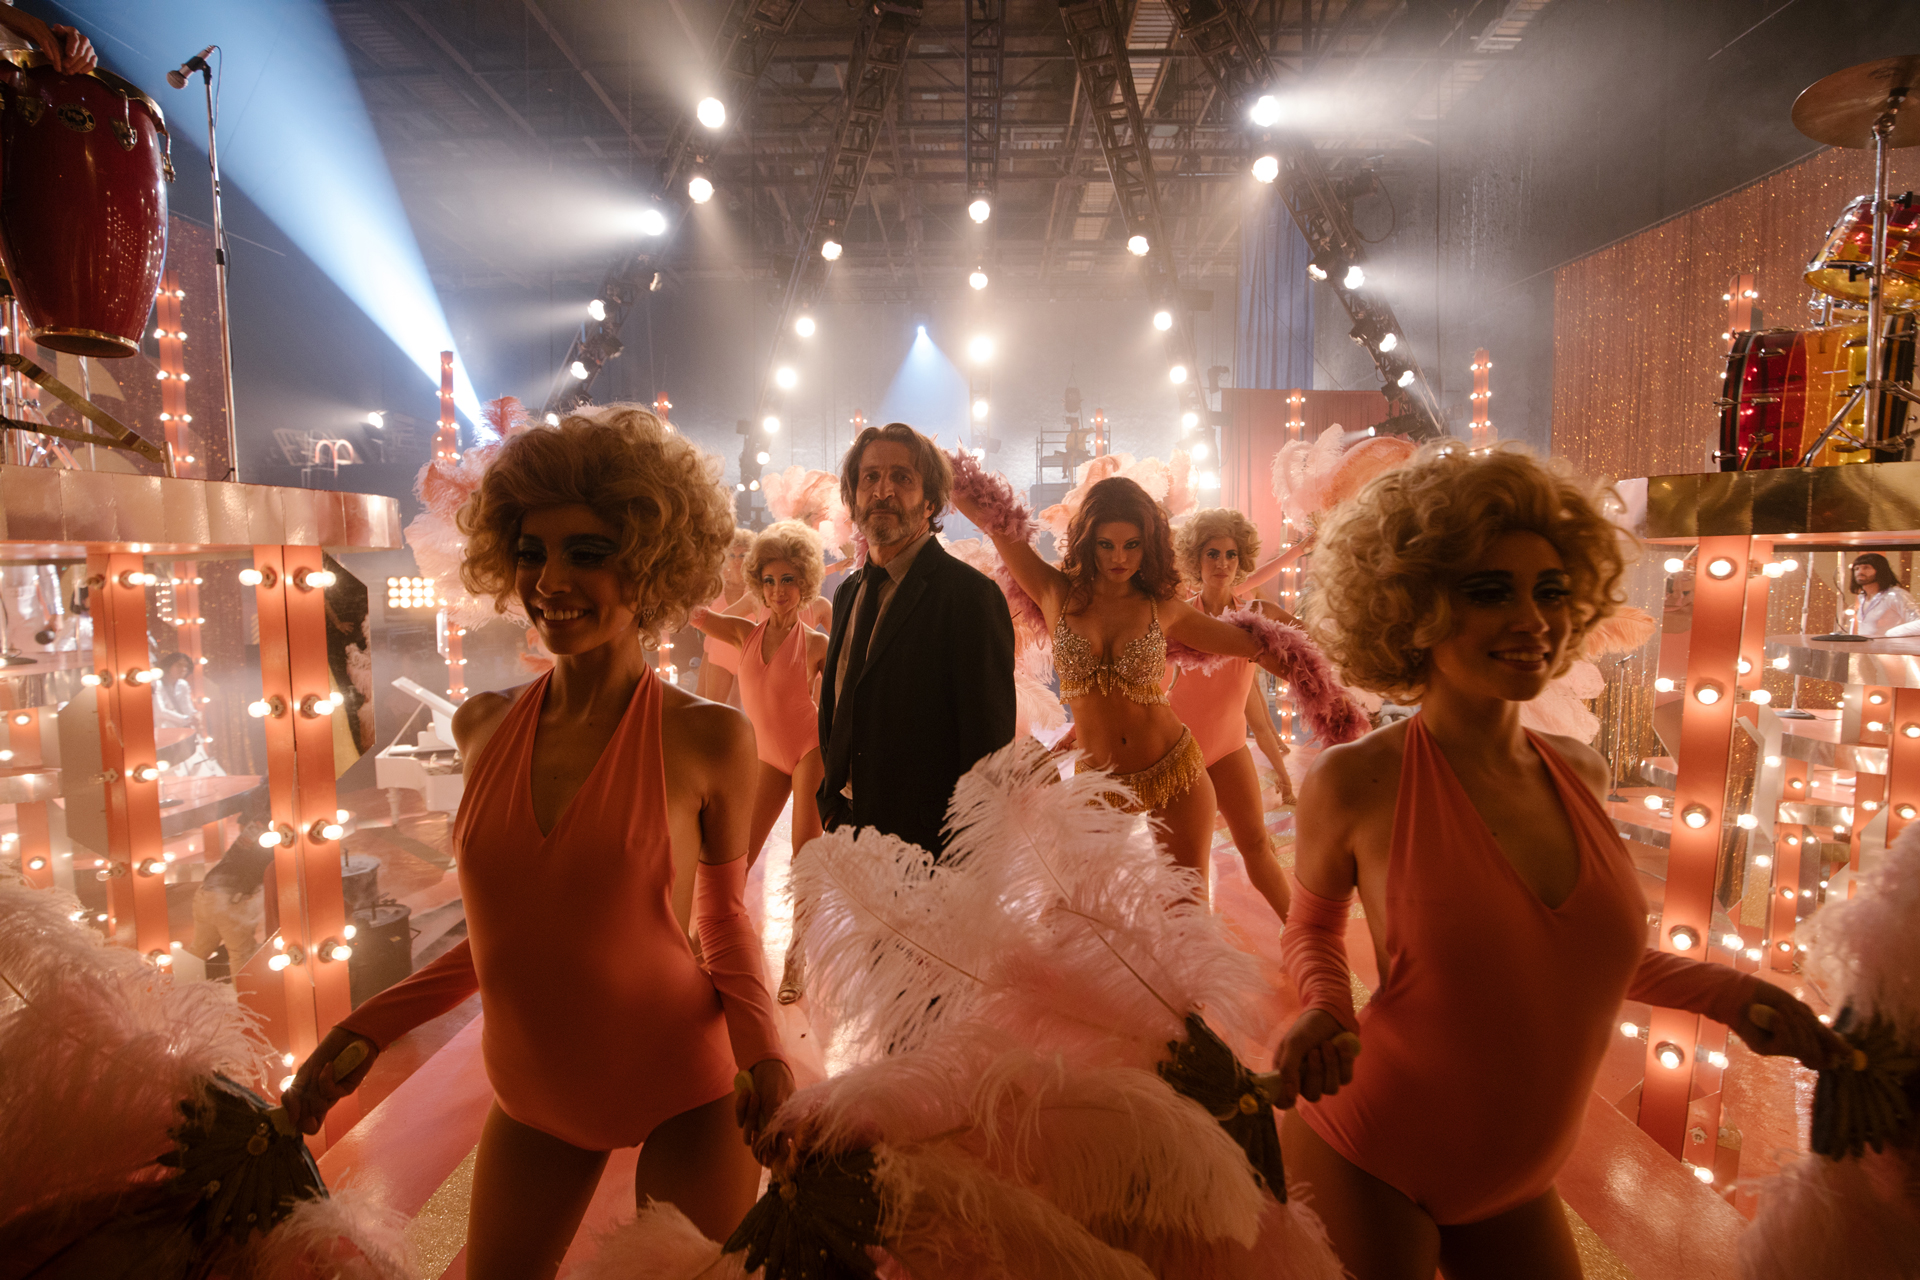 Older man in suit at center of dancers wearing pink leotards and feathers